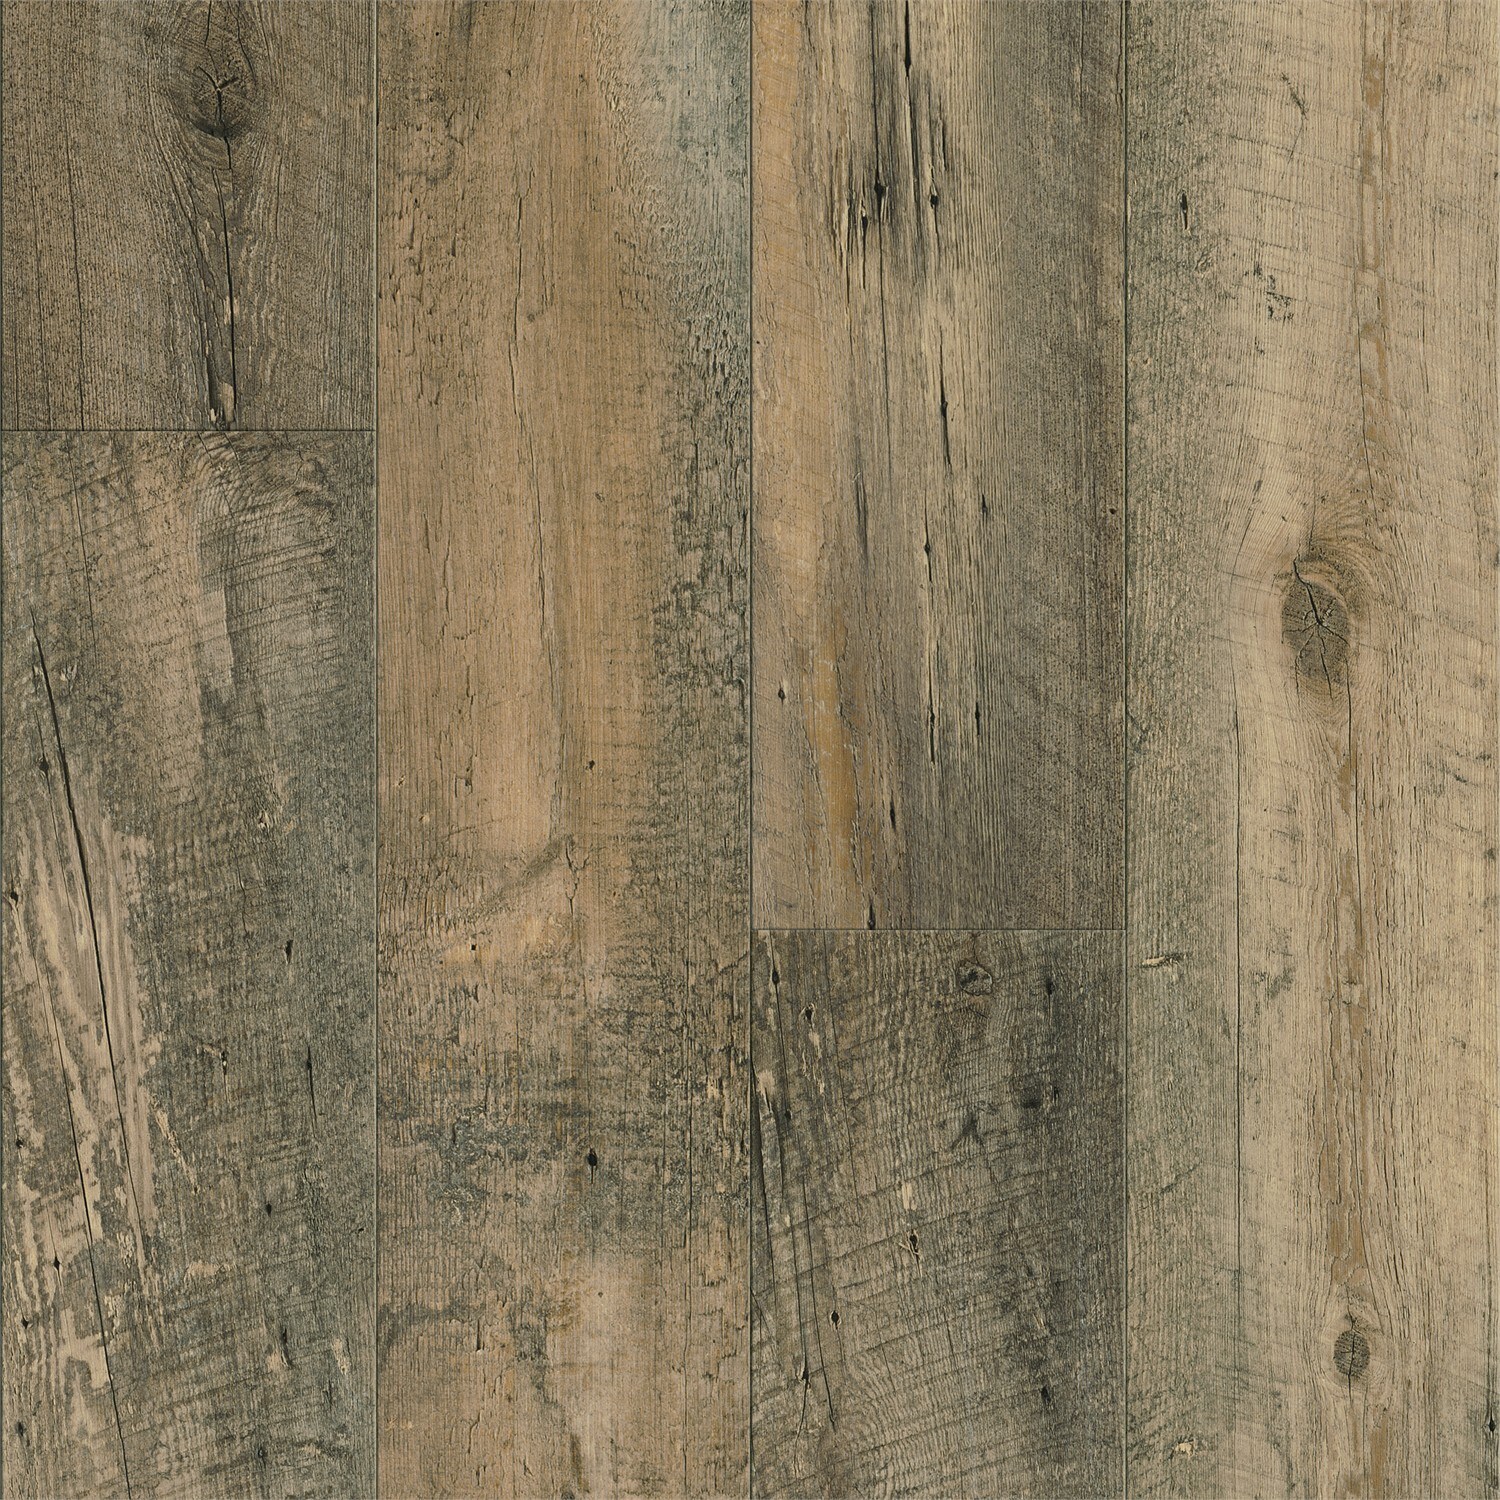 Shaded Renovering let Armstrong Flooring Luxe w/Rigid Core Farmhouse Natural 7-in Wide x 8-mm  Thick Waterproof Interlocking Luxury Vinyl Plank Flooring (28.52-sq ft) at  Lowes.com